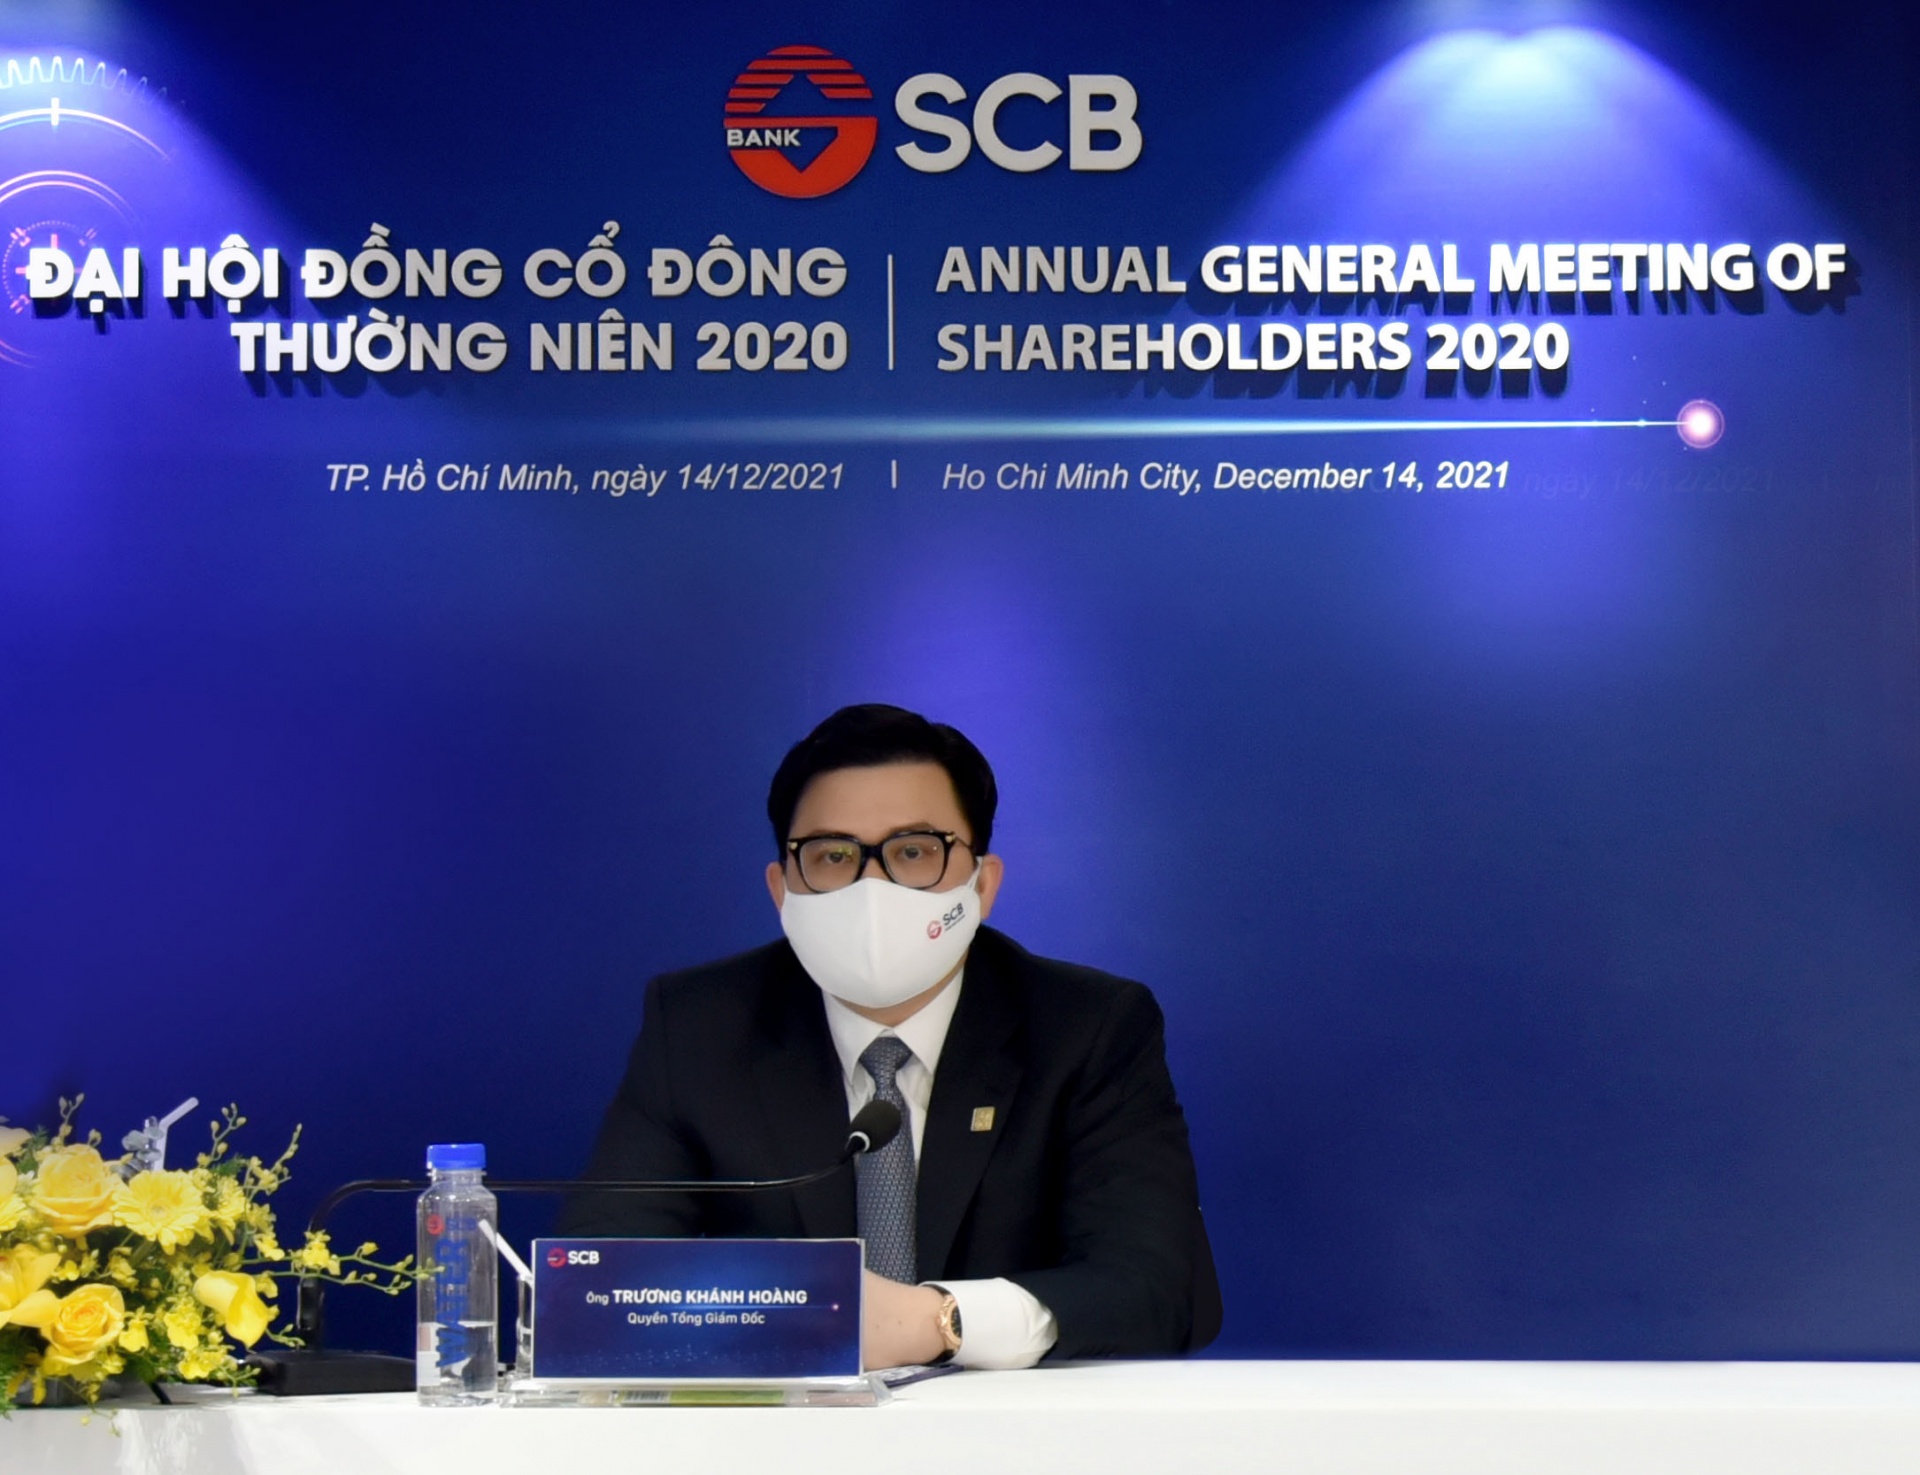 SCB successfully holds Annual General Meeting of Shareholders 2020